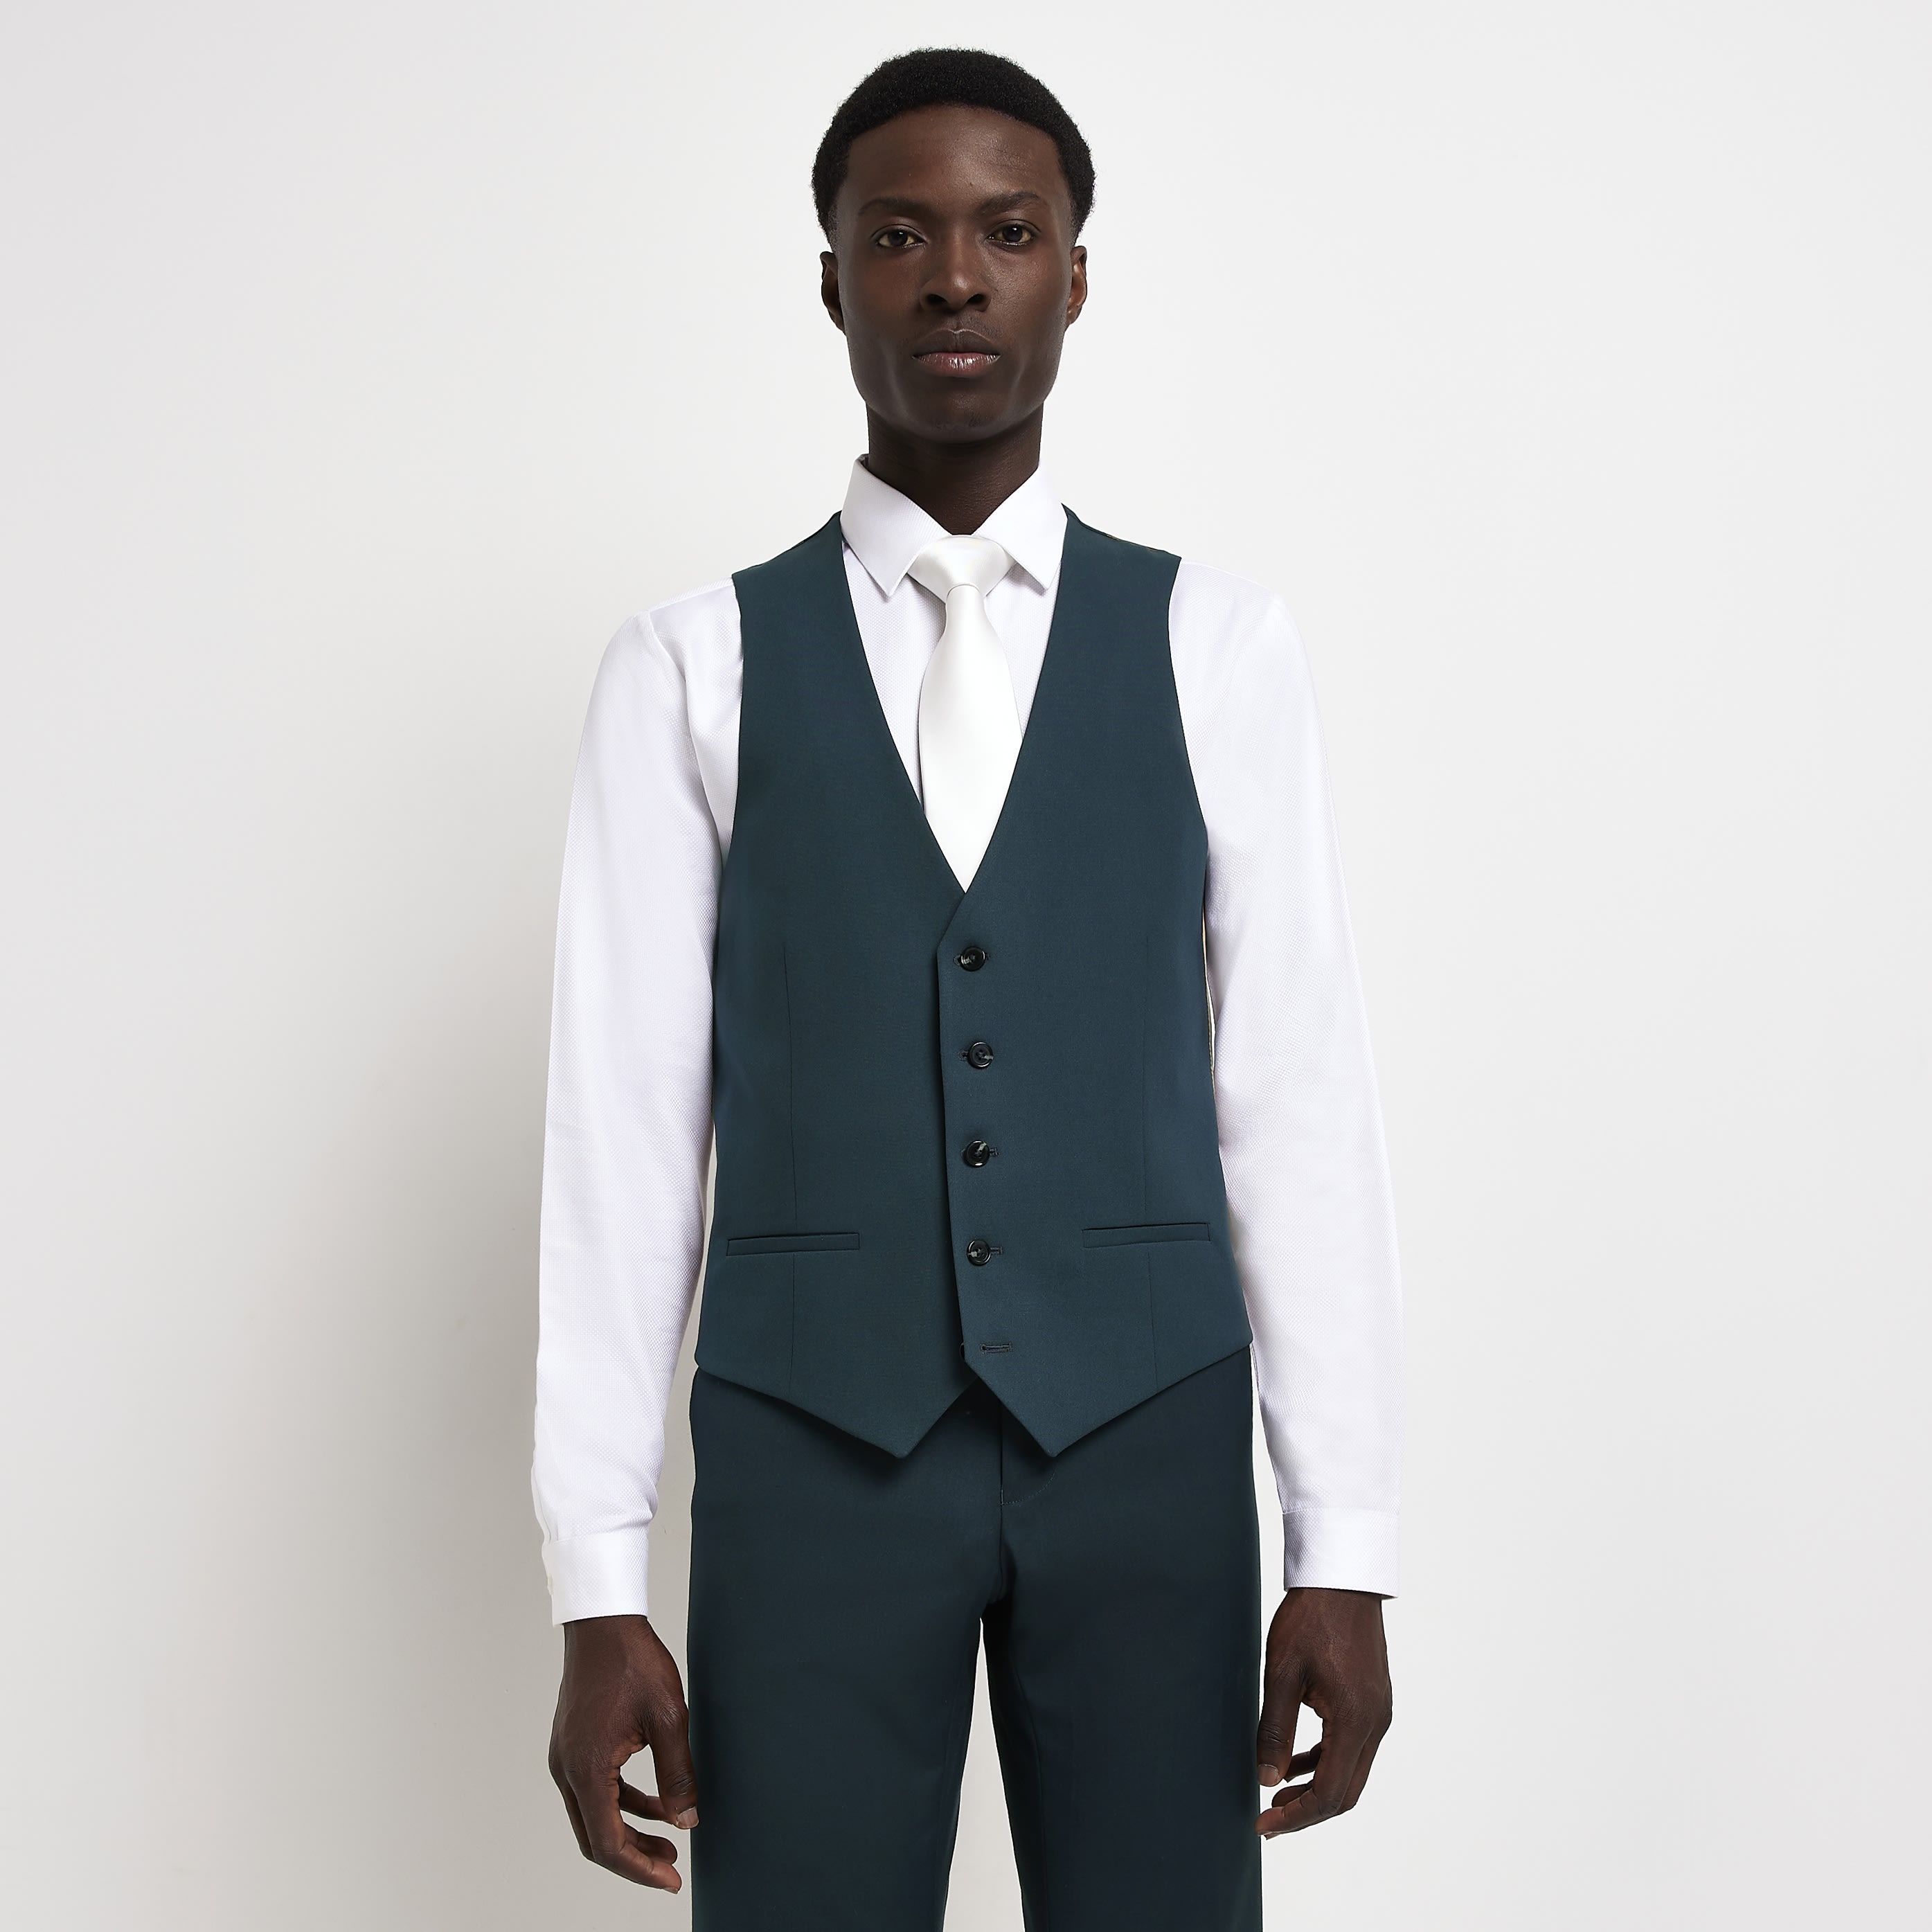 > Brand: River Island> Department: Men> Colour: Green> Type: Suit Waistcoat> Material Composition: 64% Polyester 34% Viscose 2% Elastane> Material: Polyester> Pattern: No Pattern> Occasion: Formal> Size Type: Regular> Closure: Button> Season: SS22